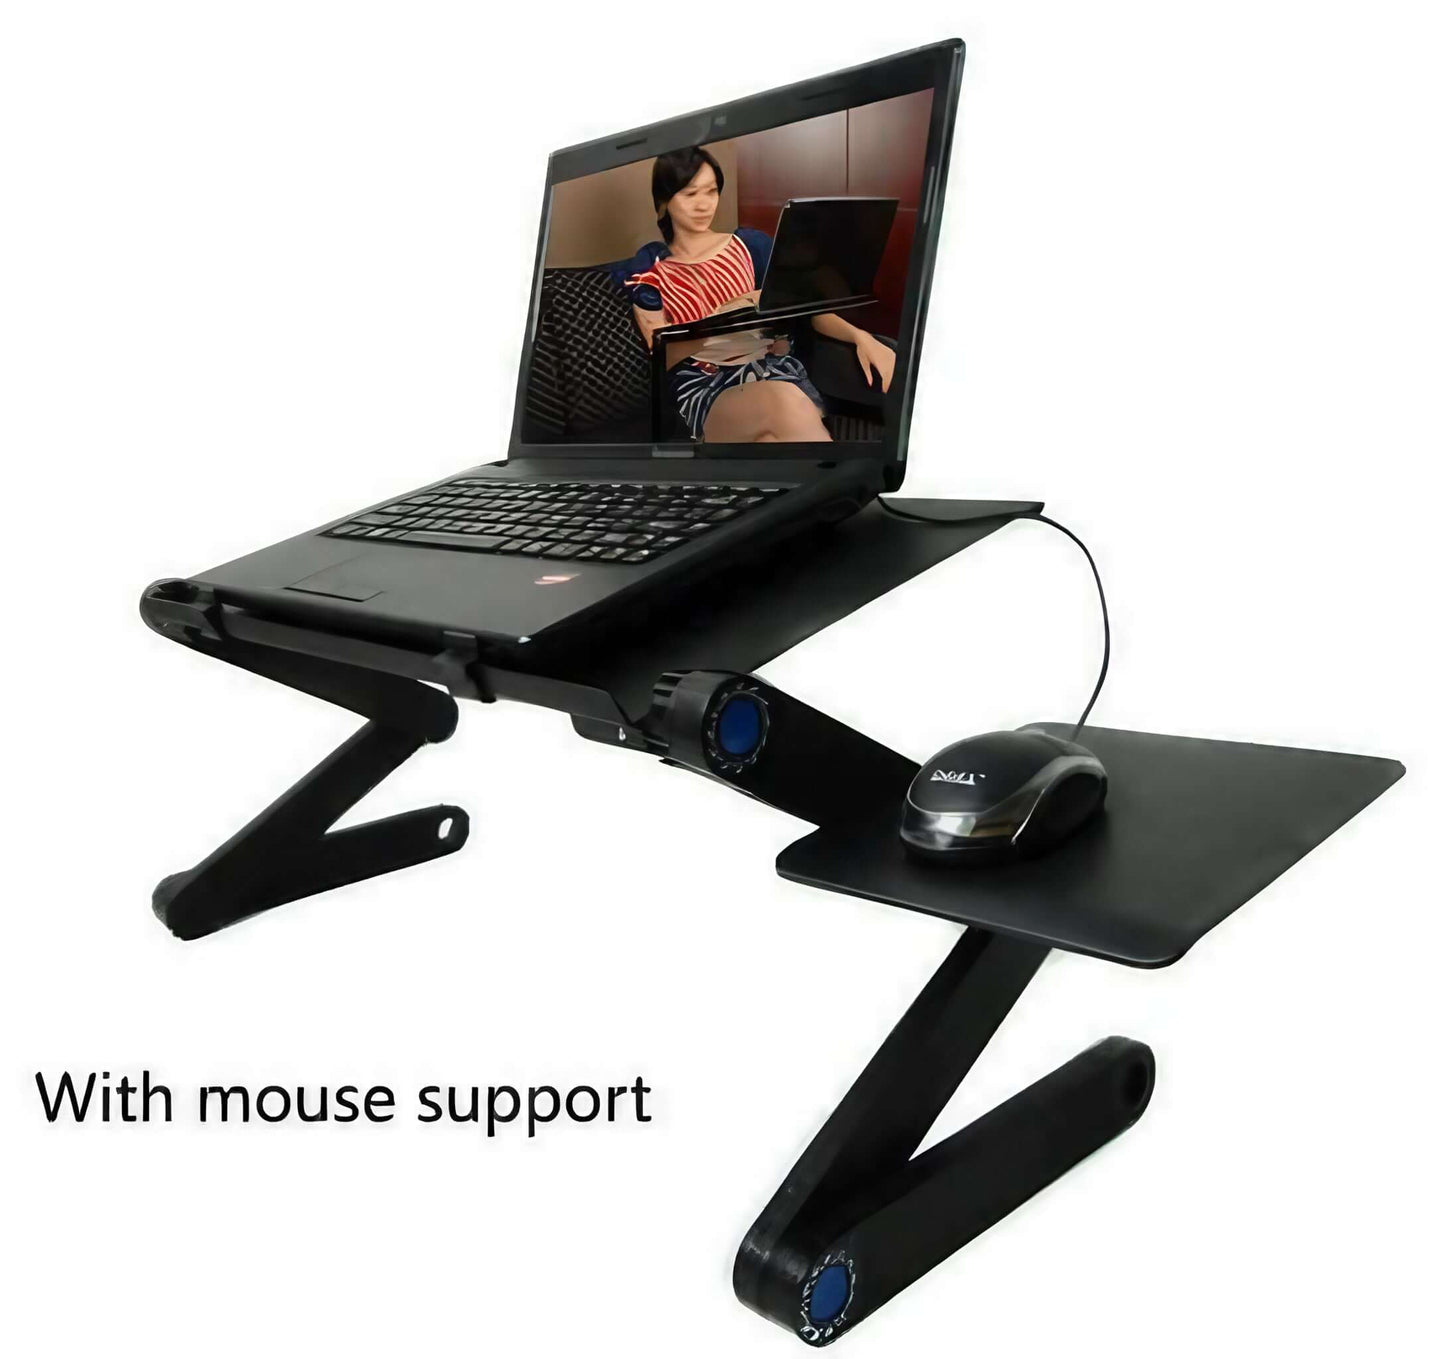 Great price on Laptop Foldable Stand Computer Accessories at Malones Specialty Store in black color